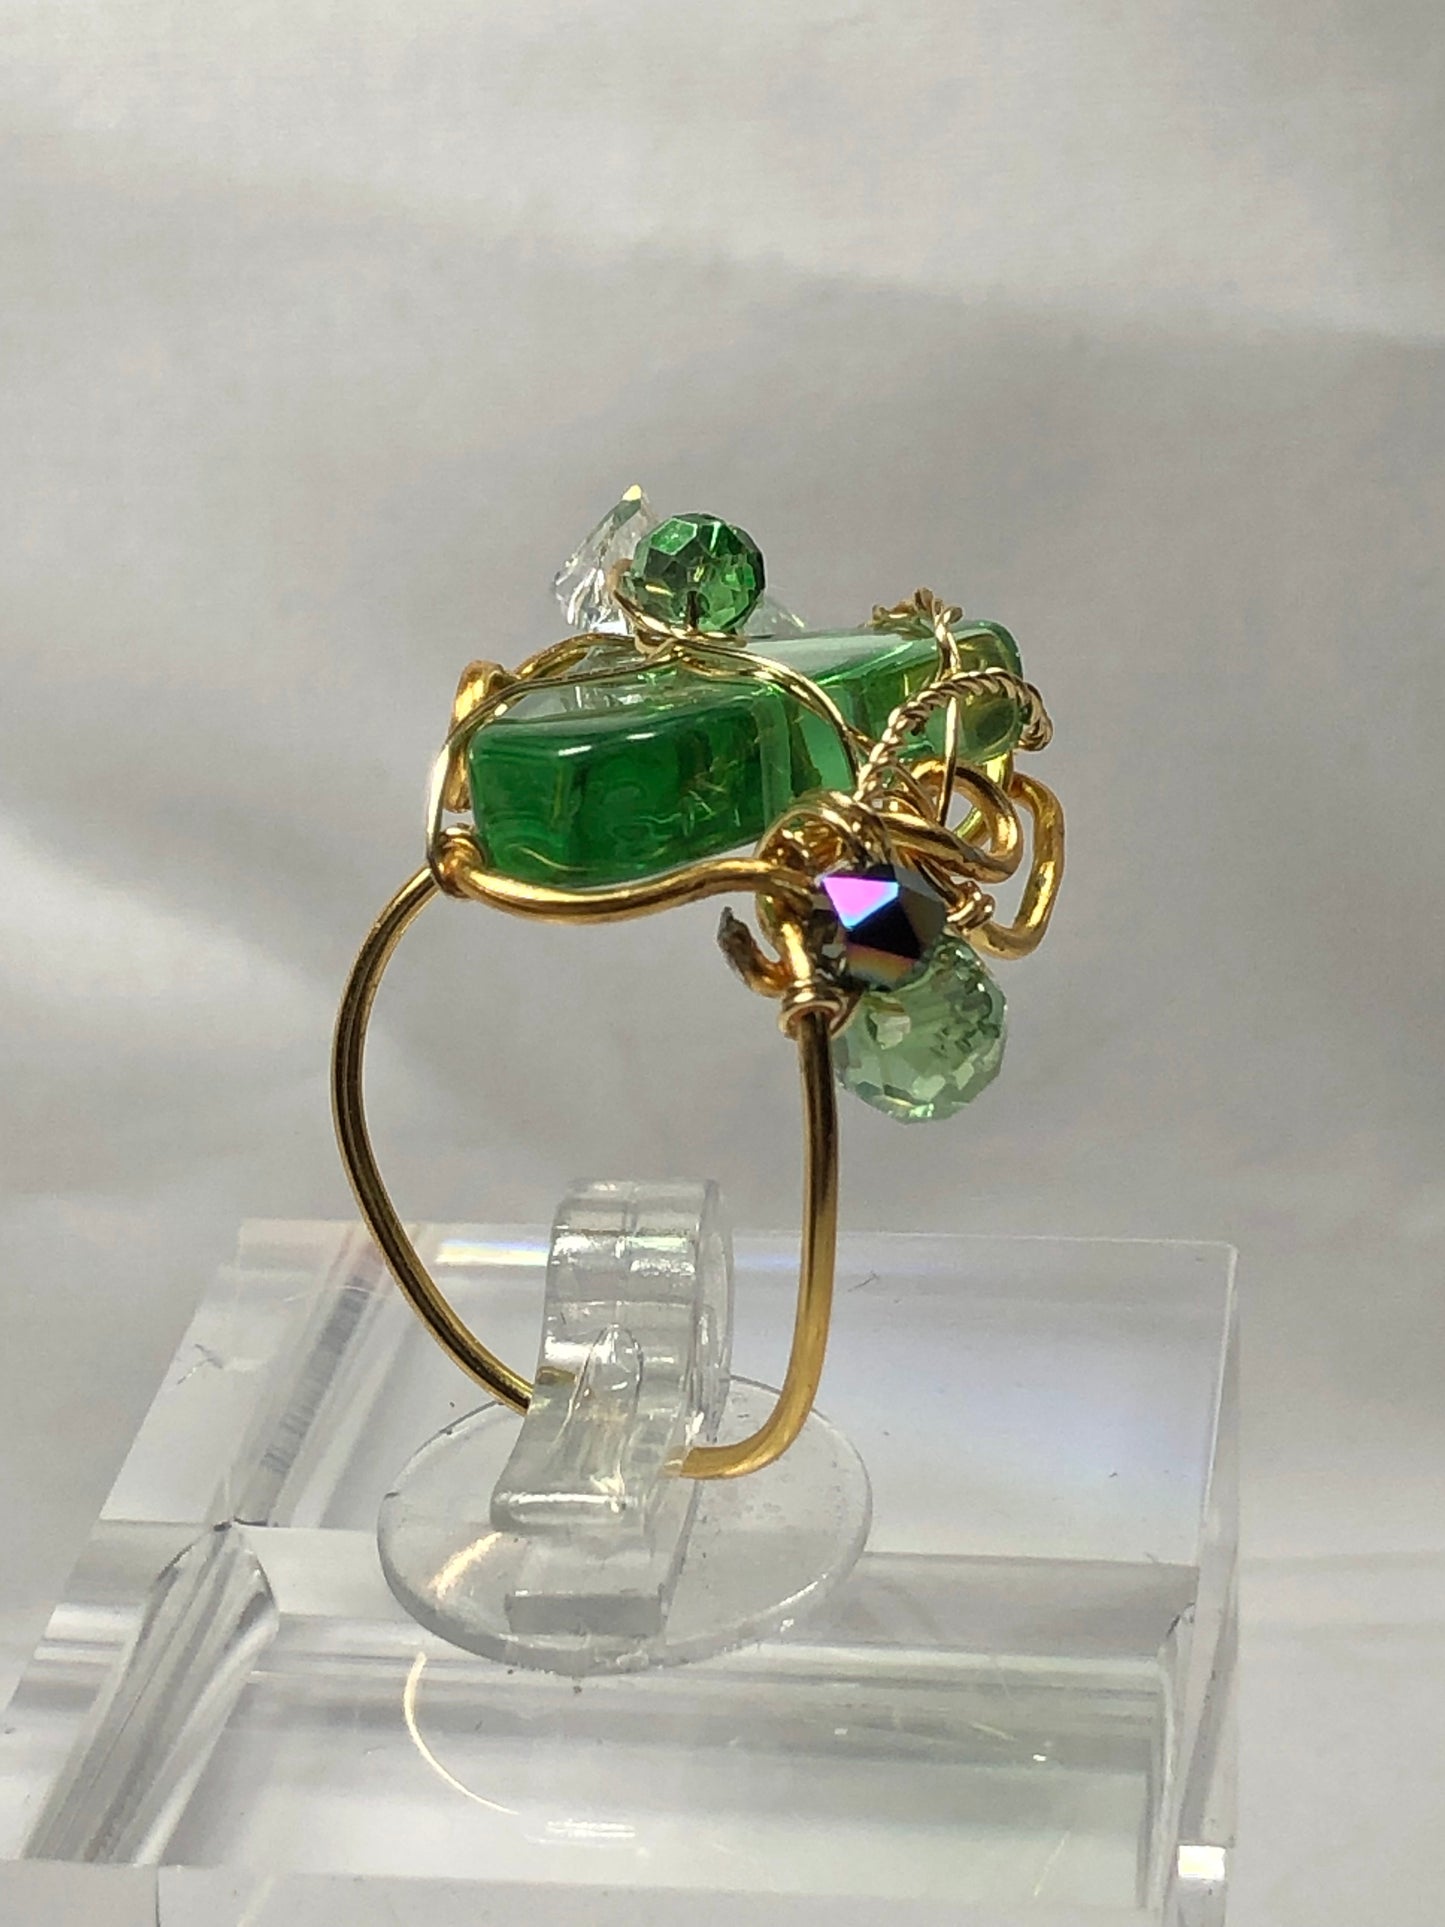 The emerald city ring